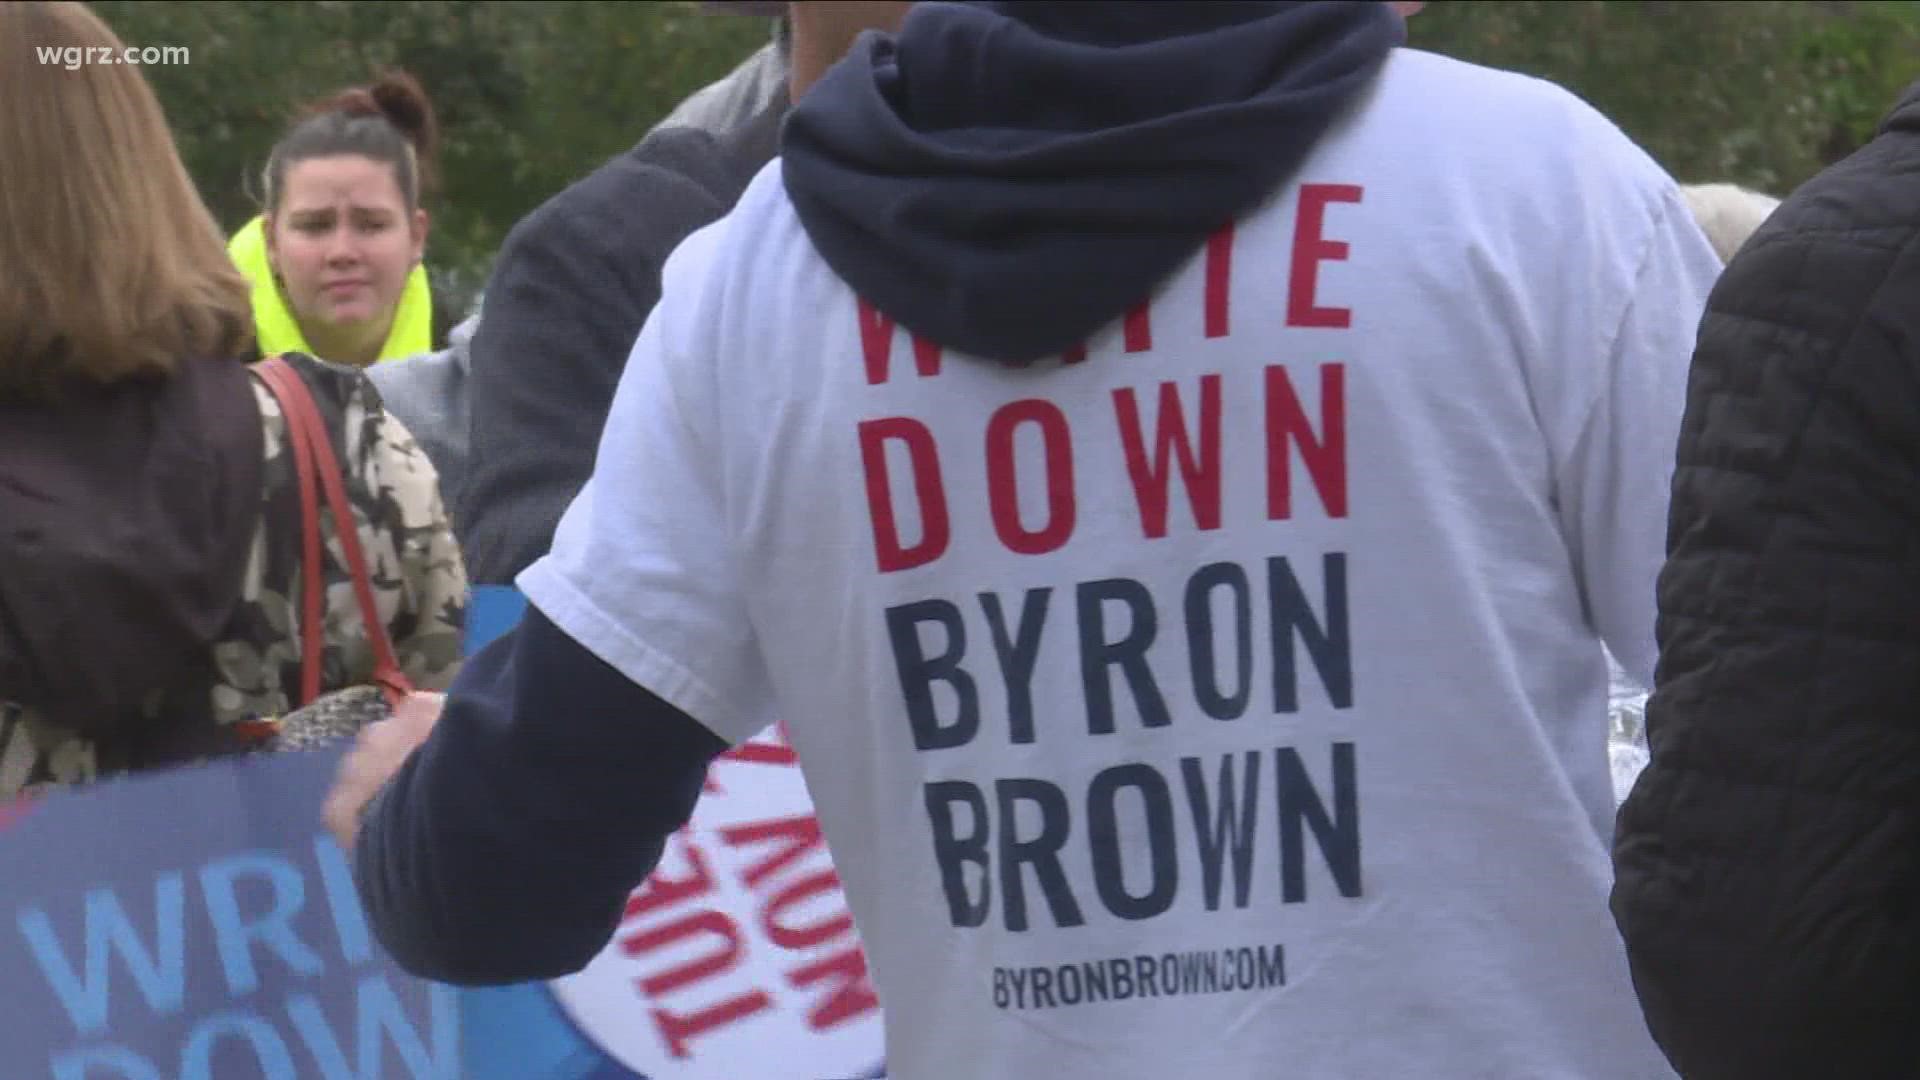 Buffalo Mayor Byron Brown knows he has a battle to win another term in office. Without the star power, he is focusing on the people who will cast a ballot.